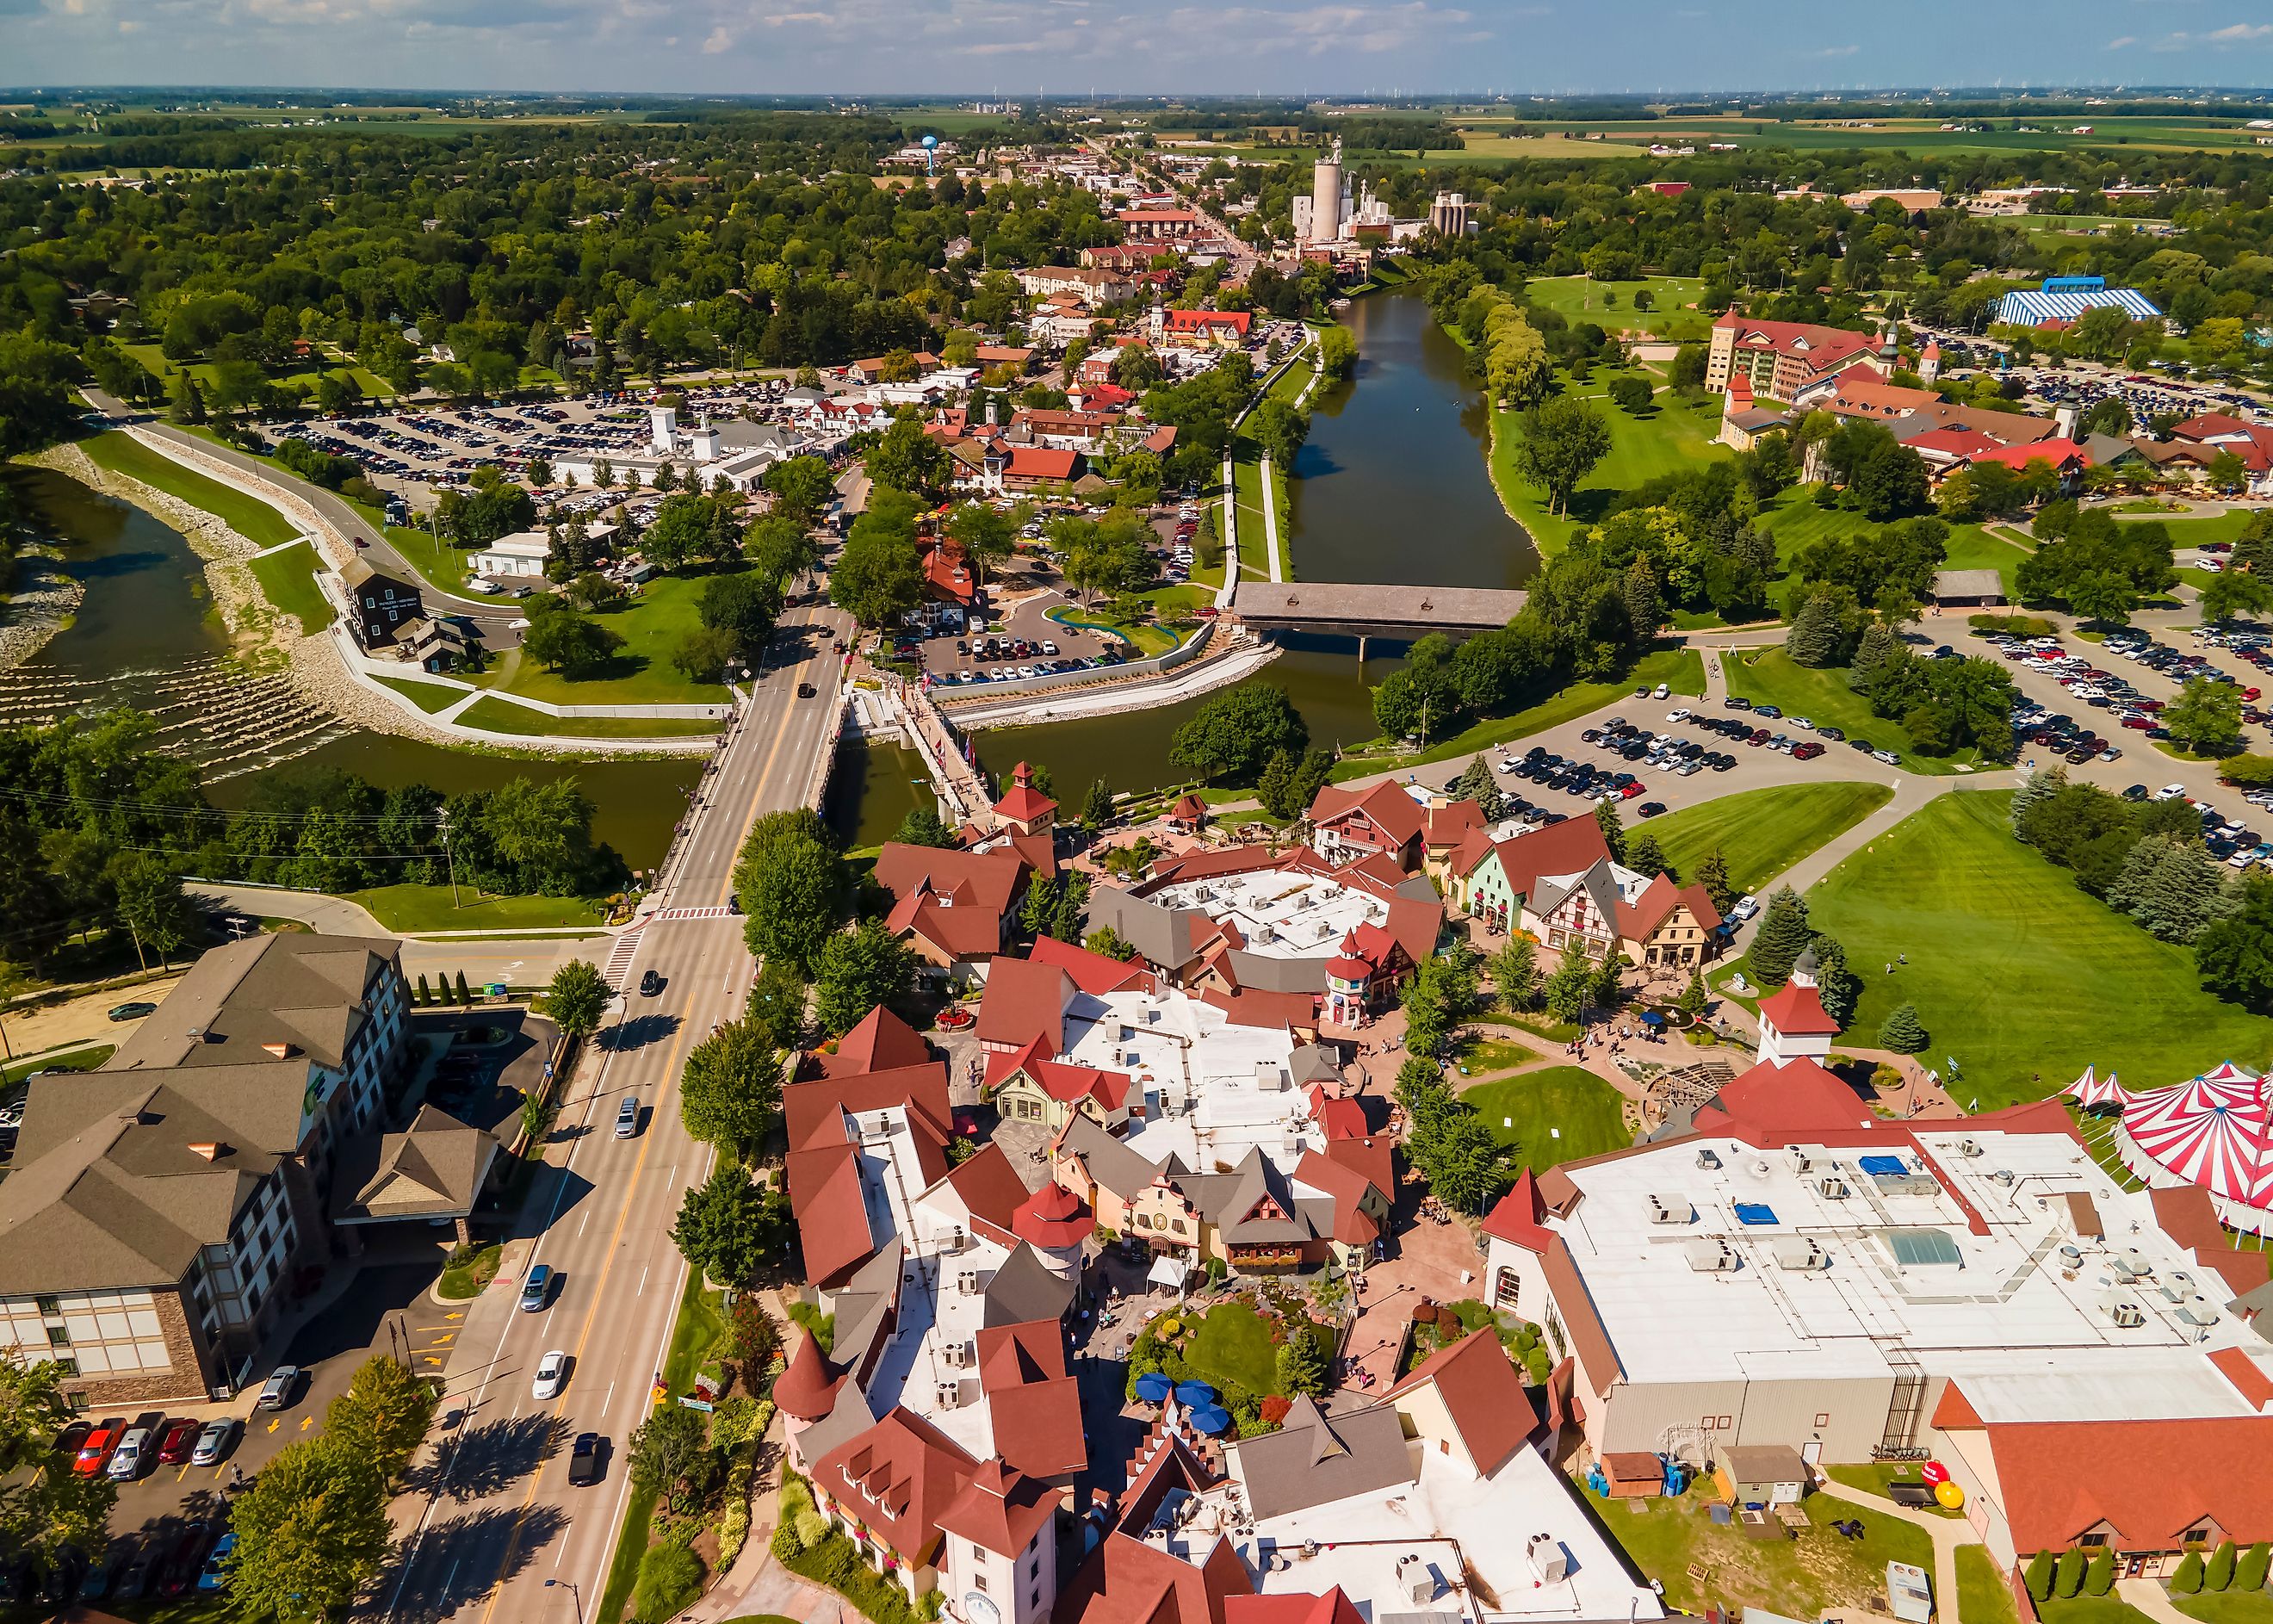 Aerial view of Frankenmuth, Michigan, known for its Bavarian-style architecture.